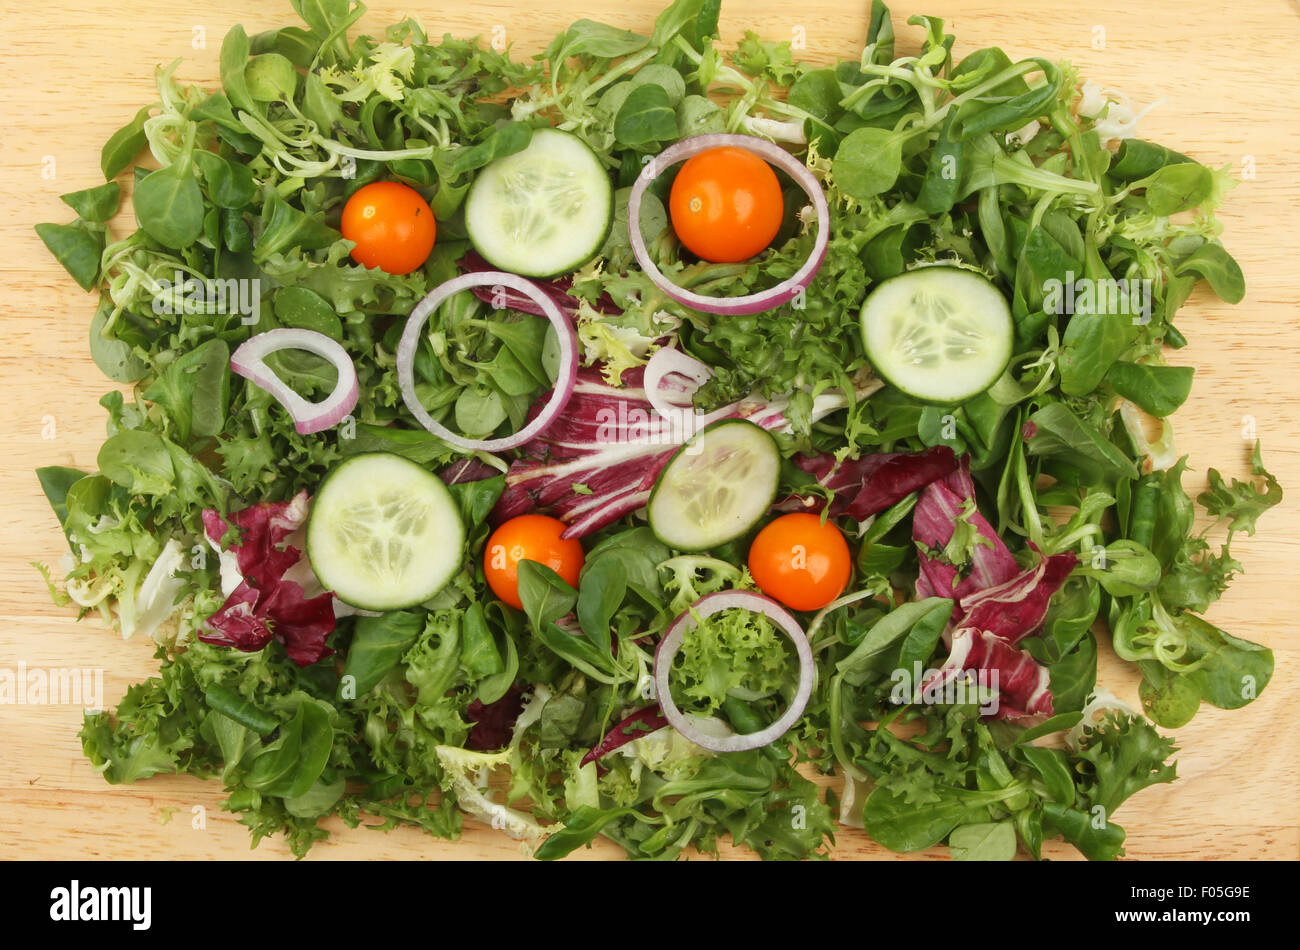 Mixed salad on a wooden board viewed from above Stock Photo